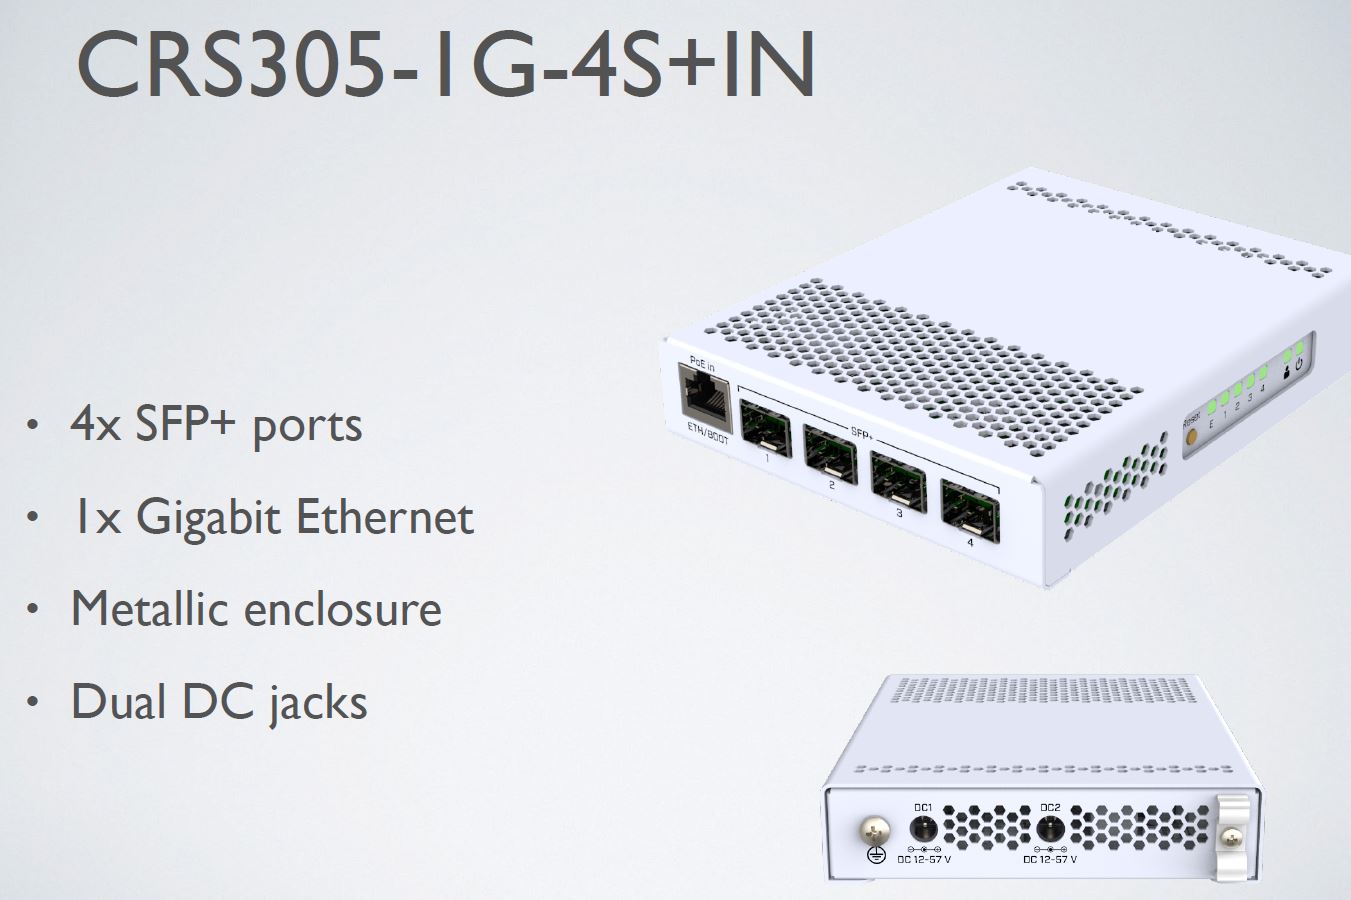 MikroTik CRS305 1G 4S+IN Switch